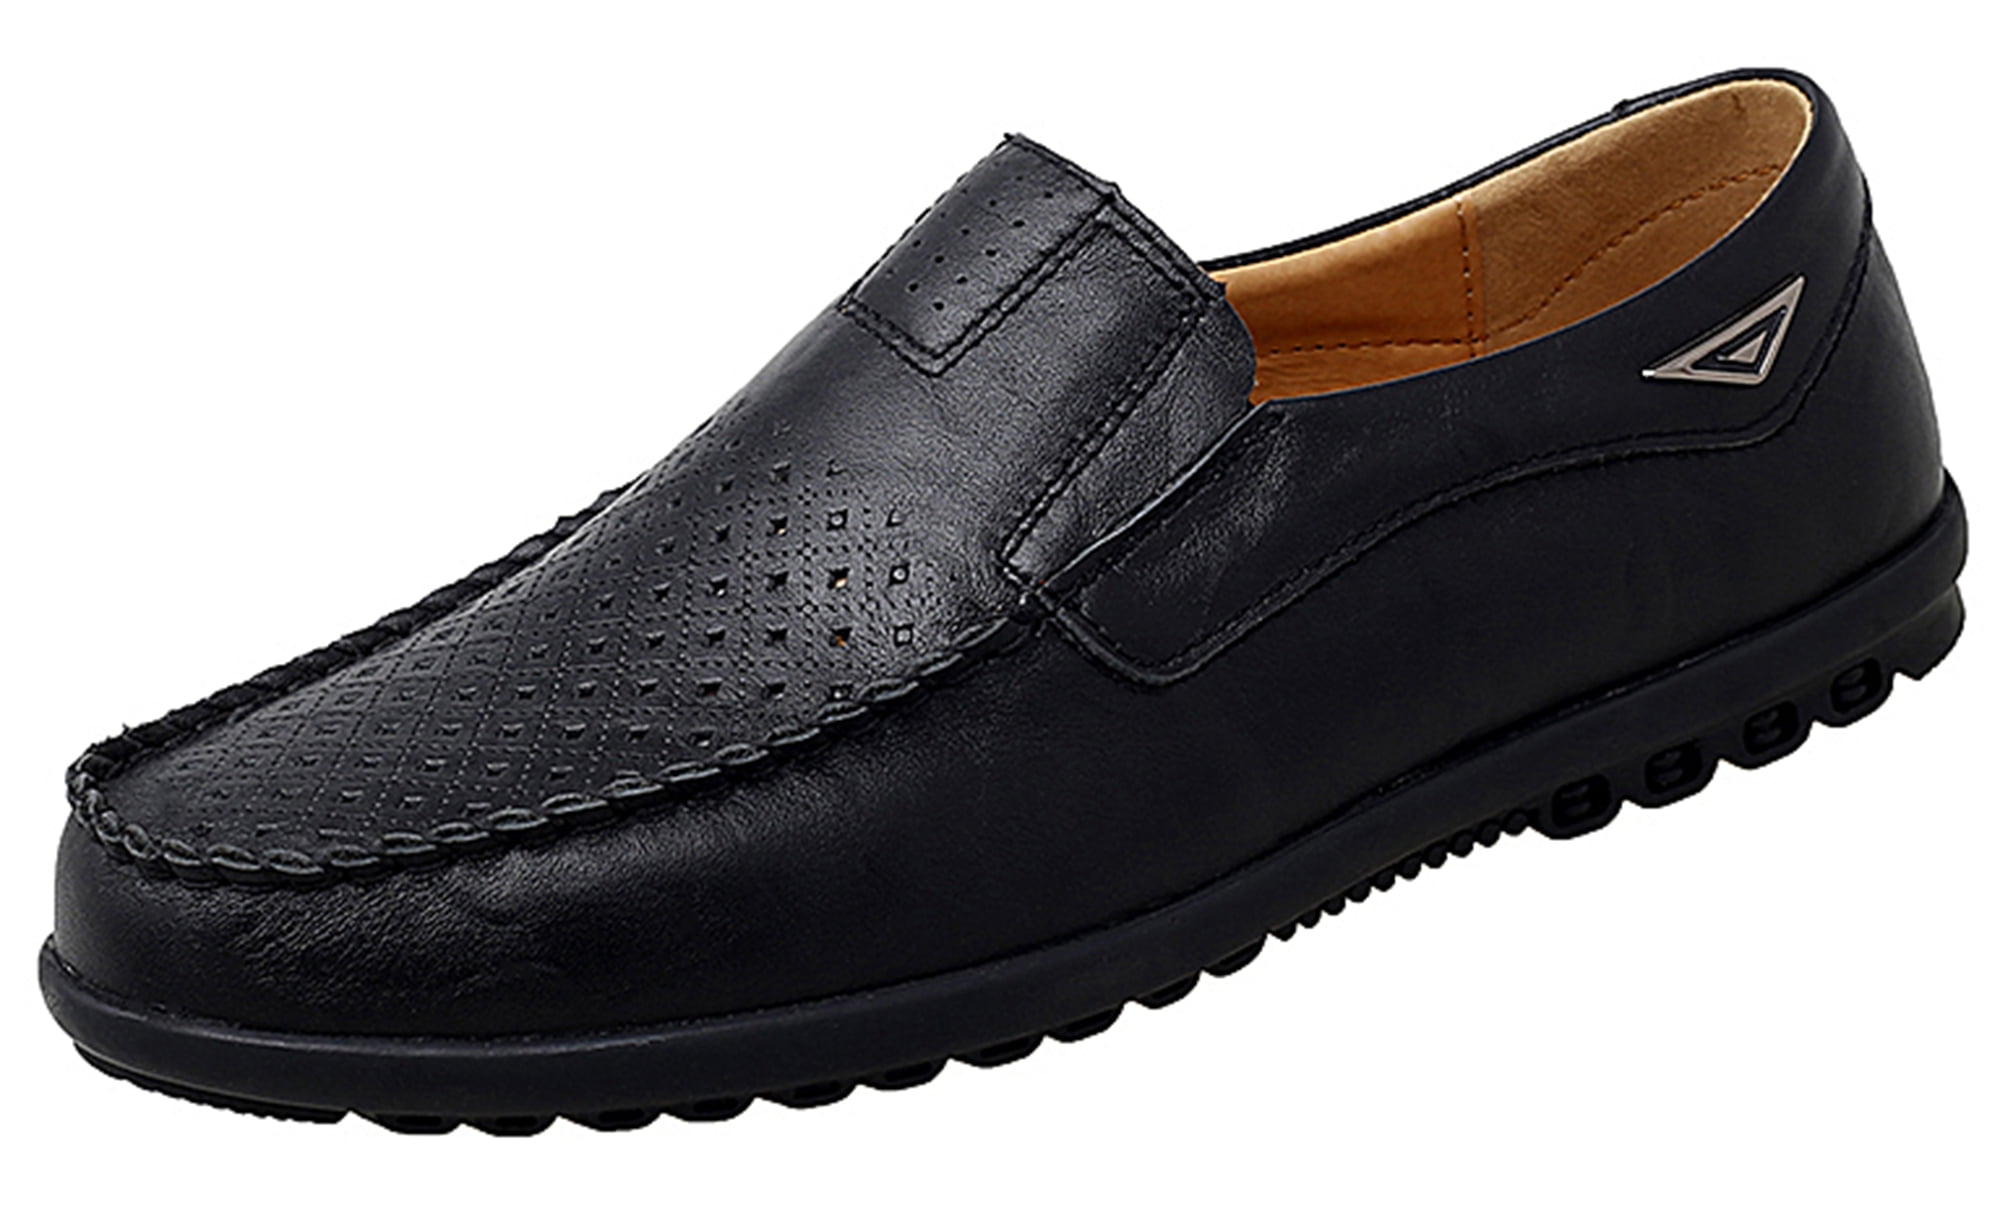 Go Tour Men’s Casual Leather Fashion Slip-on Loafers Shoes 